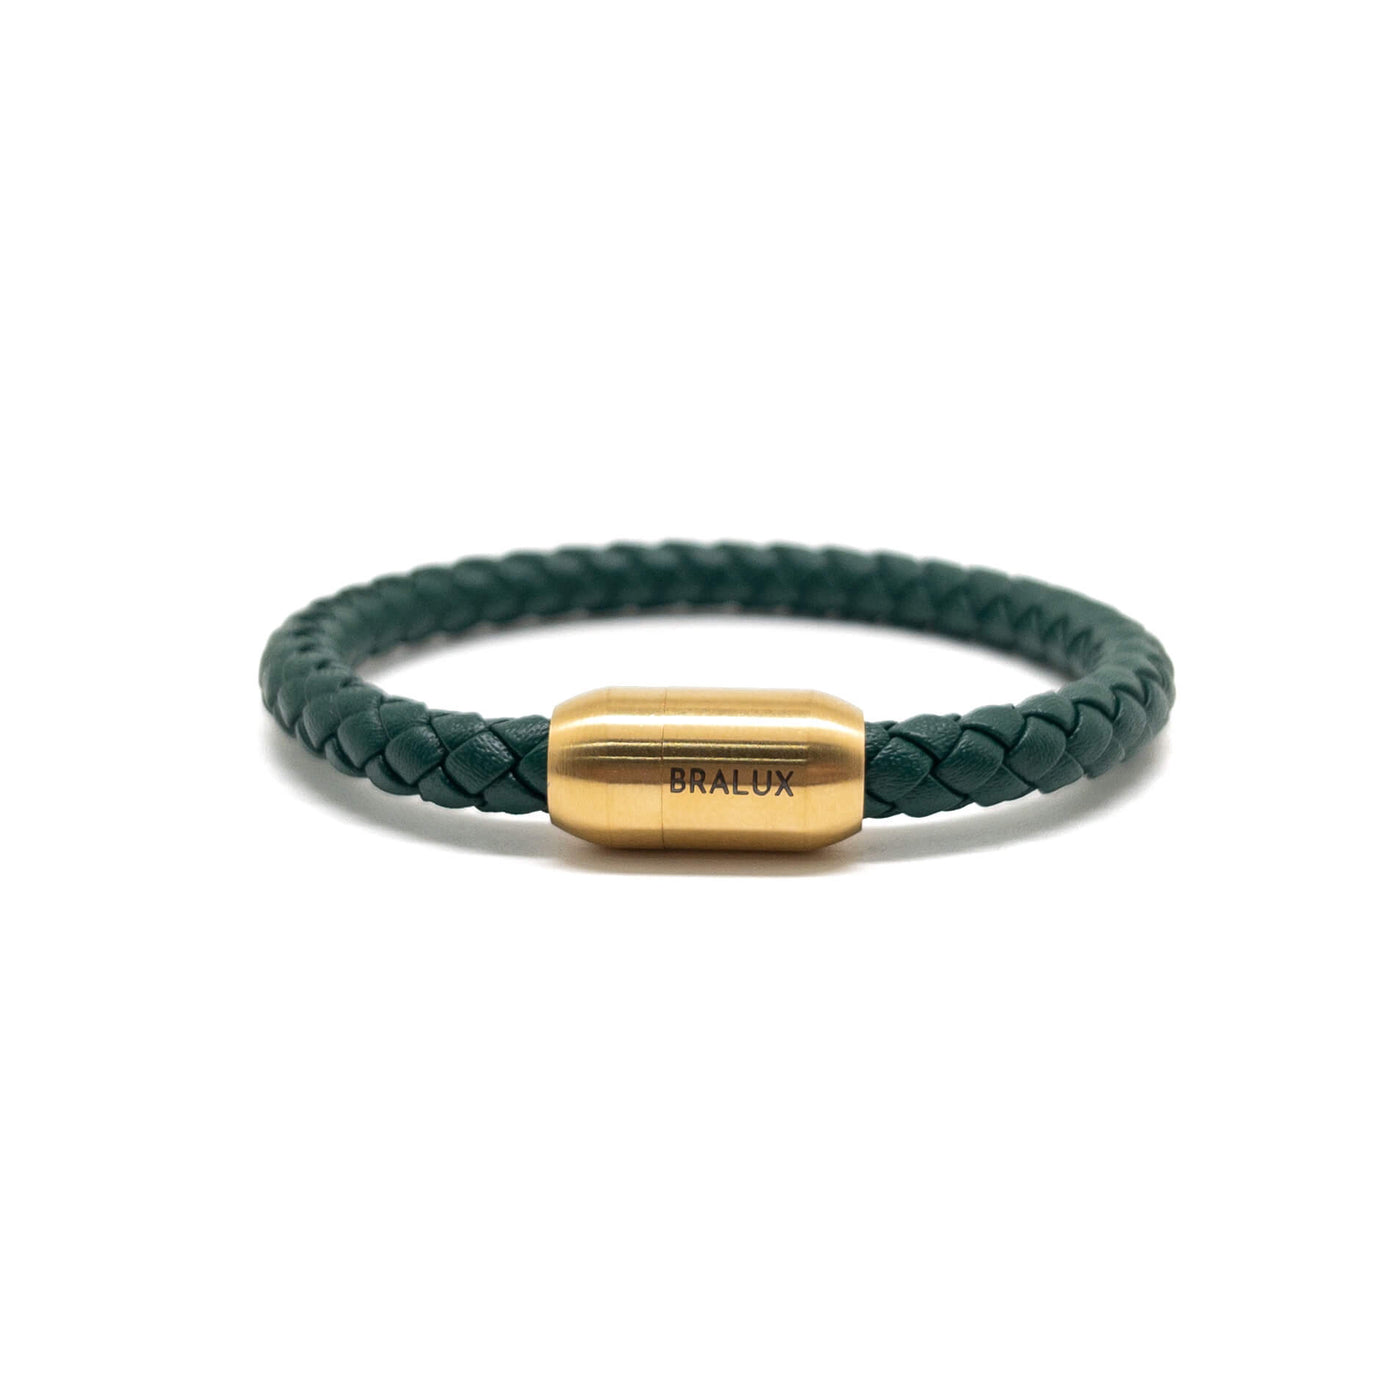 The 6mm Green and Gold Plated Rounded Buckle bracelet